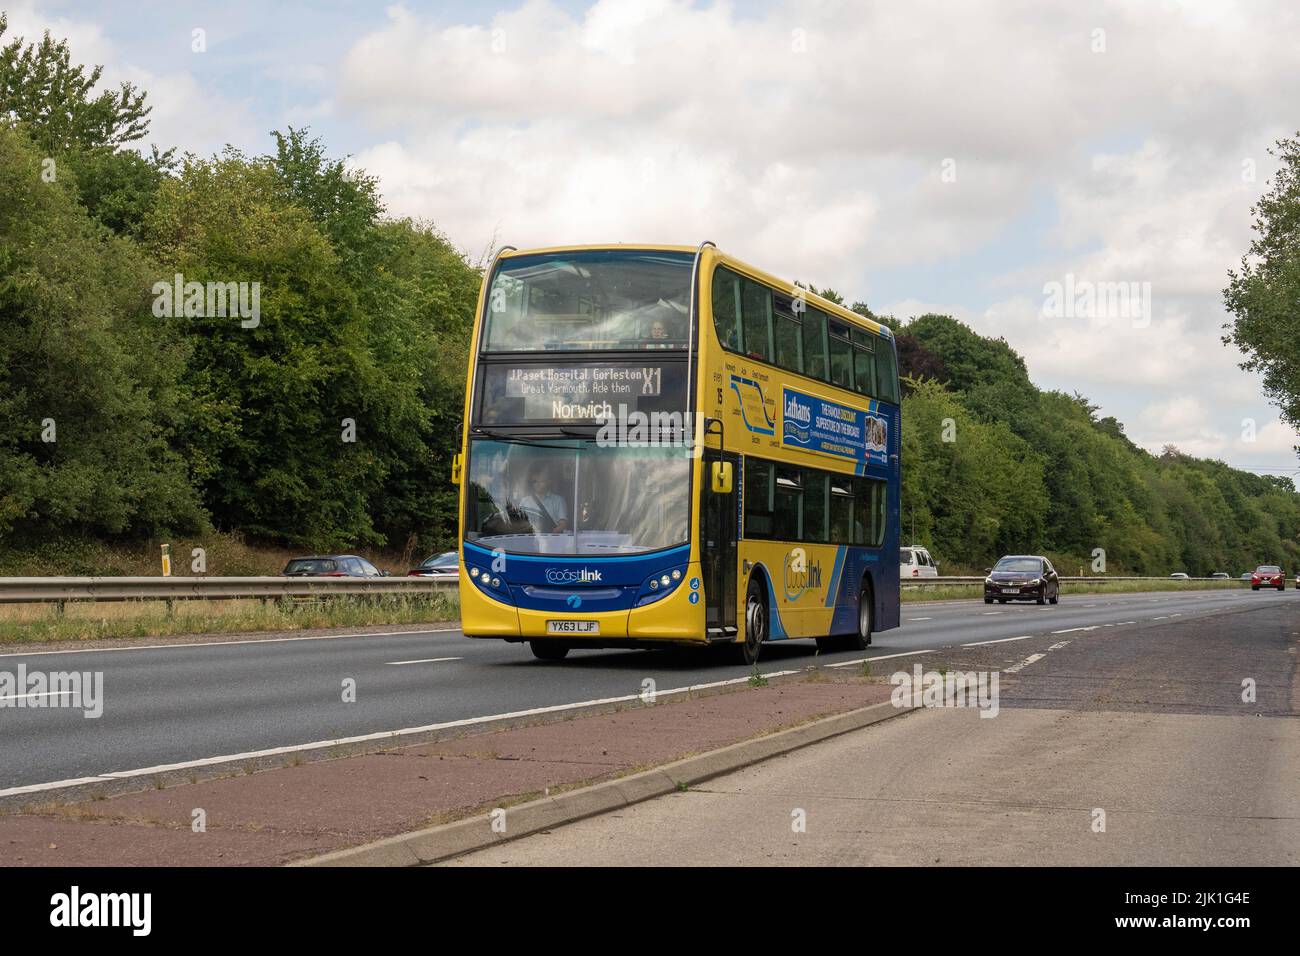 Coastlink double decker bus to Norwich on the A47 bypass Stock Photo